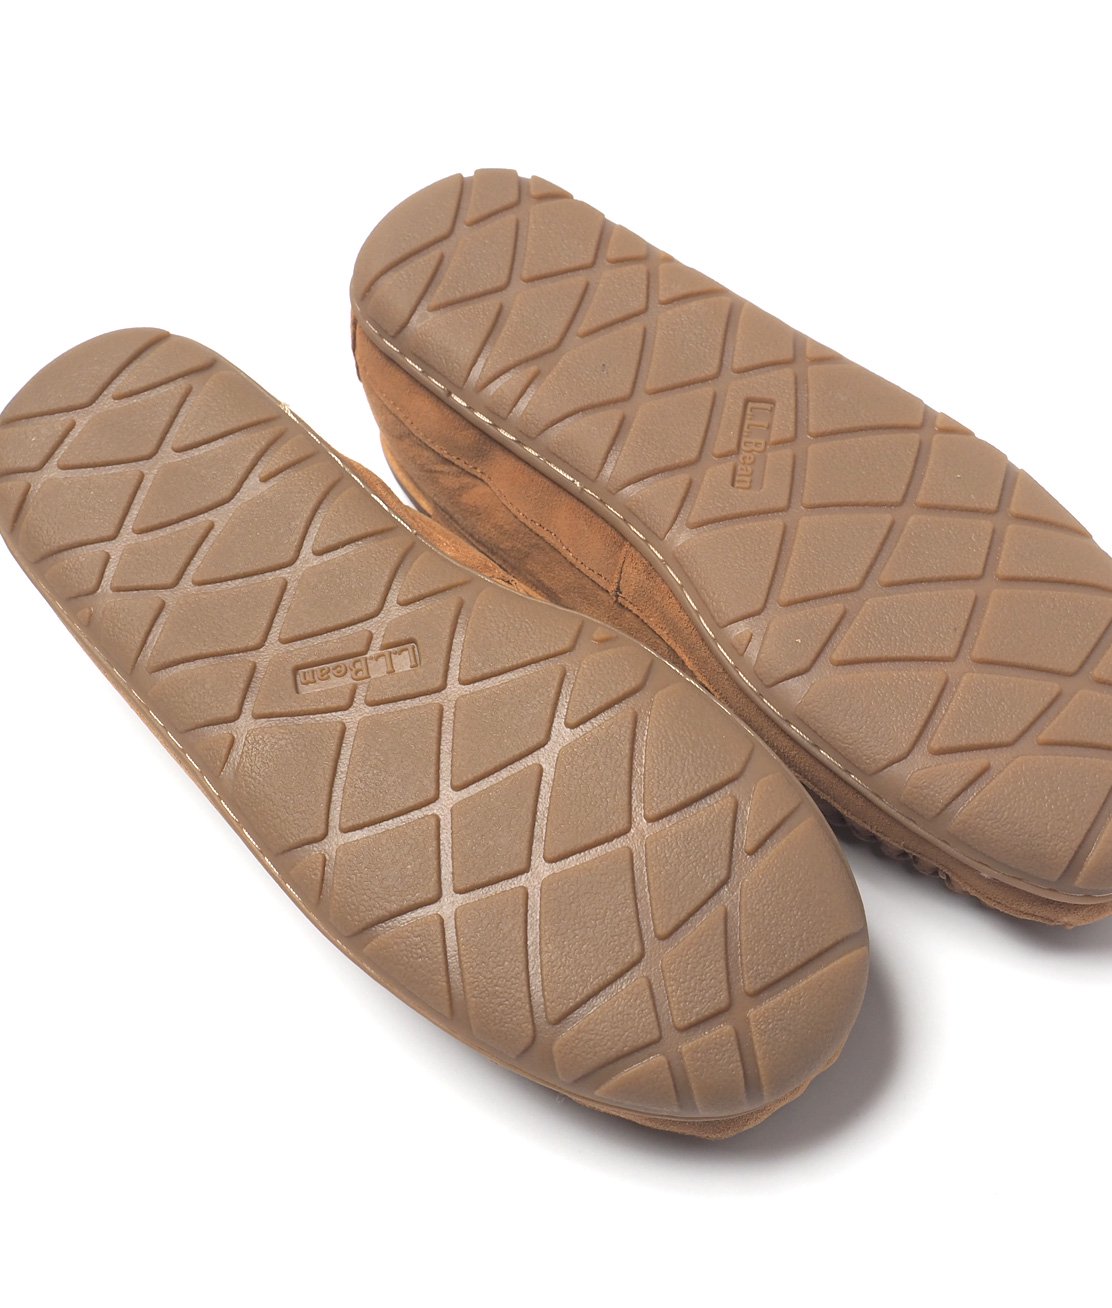 【L.L.Bean】WICKED GOOD SLIPPER MOCCASINS - BROWN モカシンシューズ スリッパ 暖かい - HUNKY  DORY